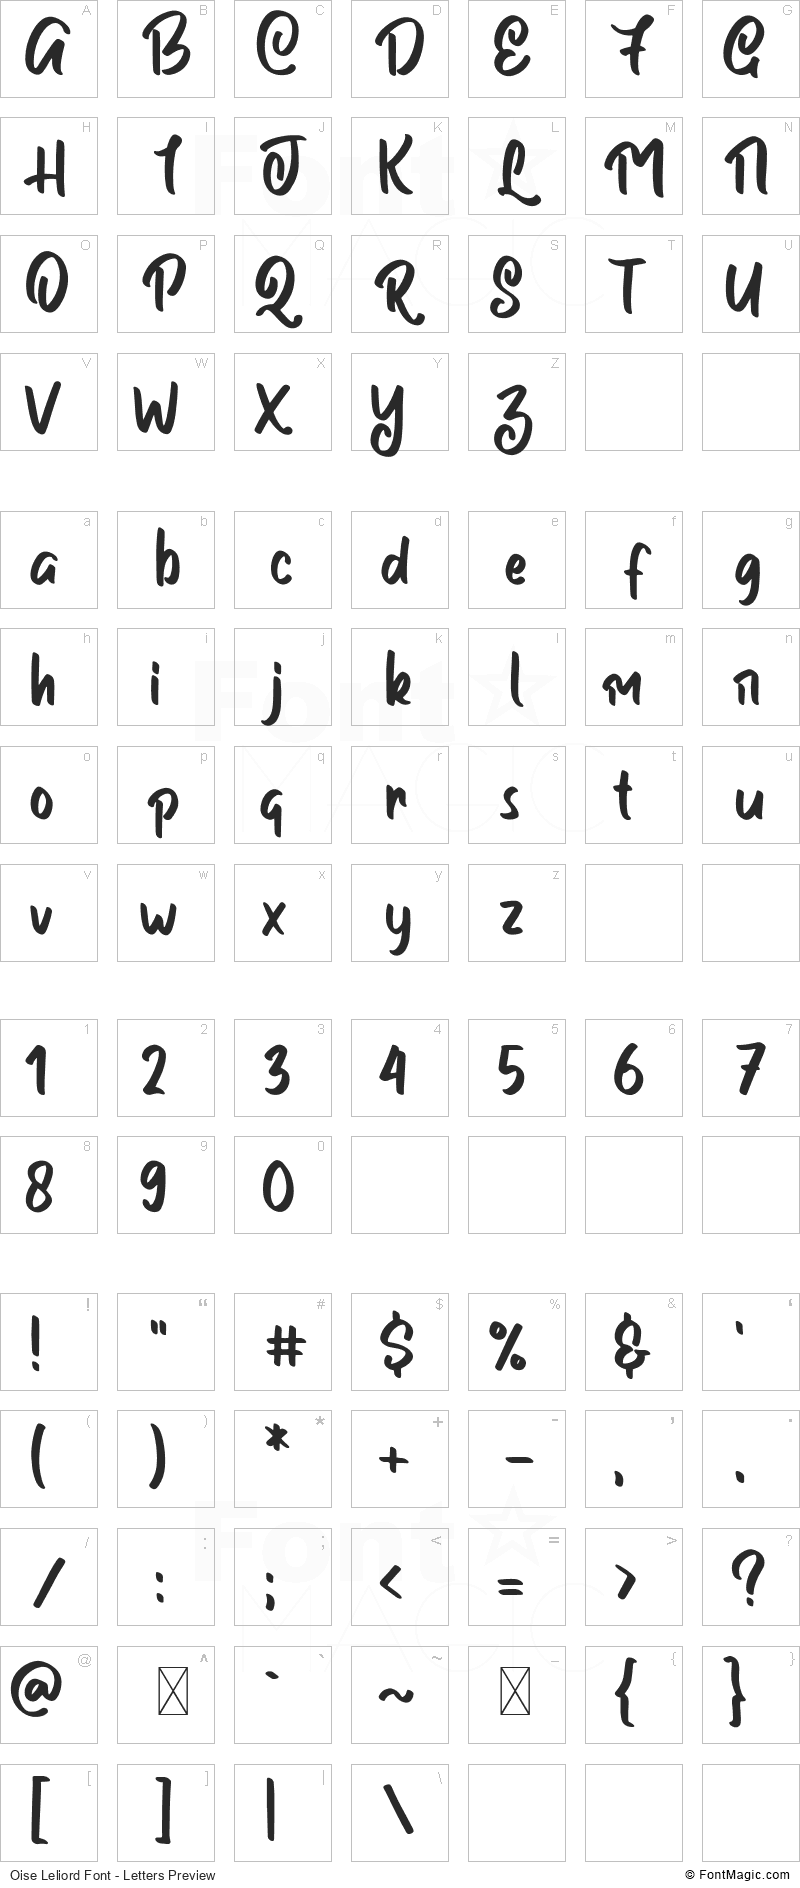 Oise Leliord Font - All Latters Preview Chart